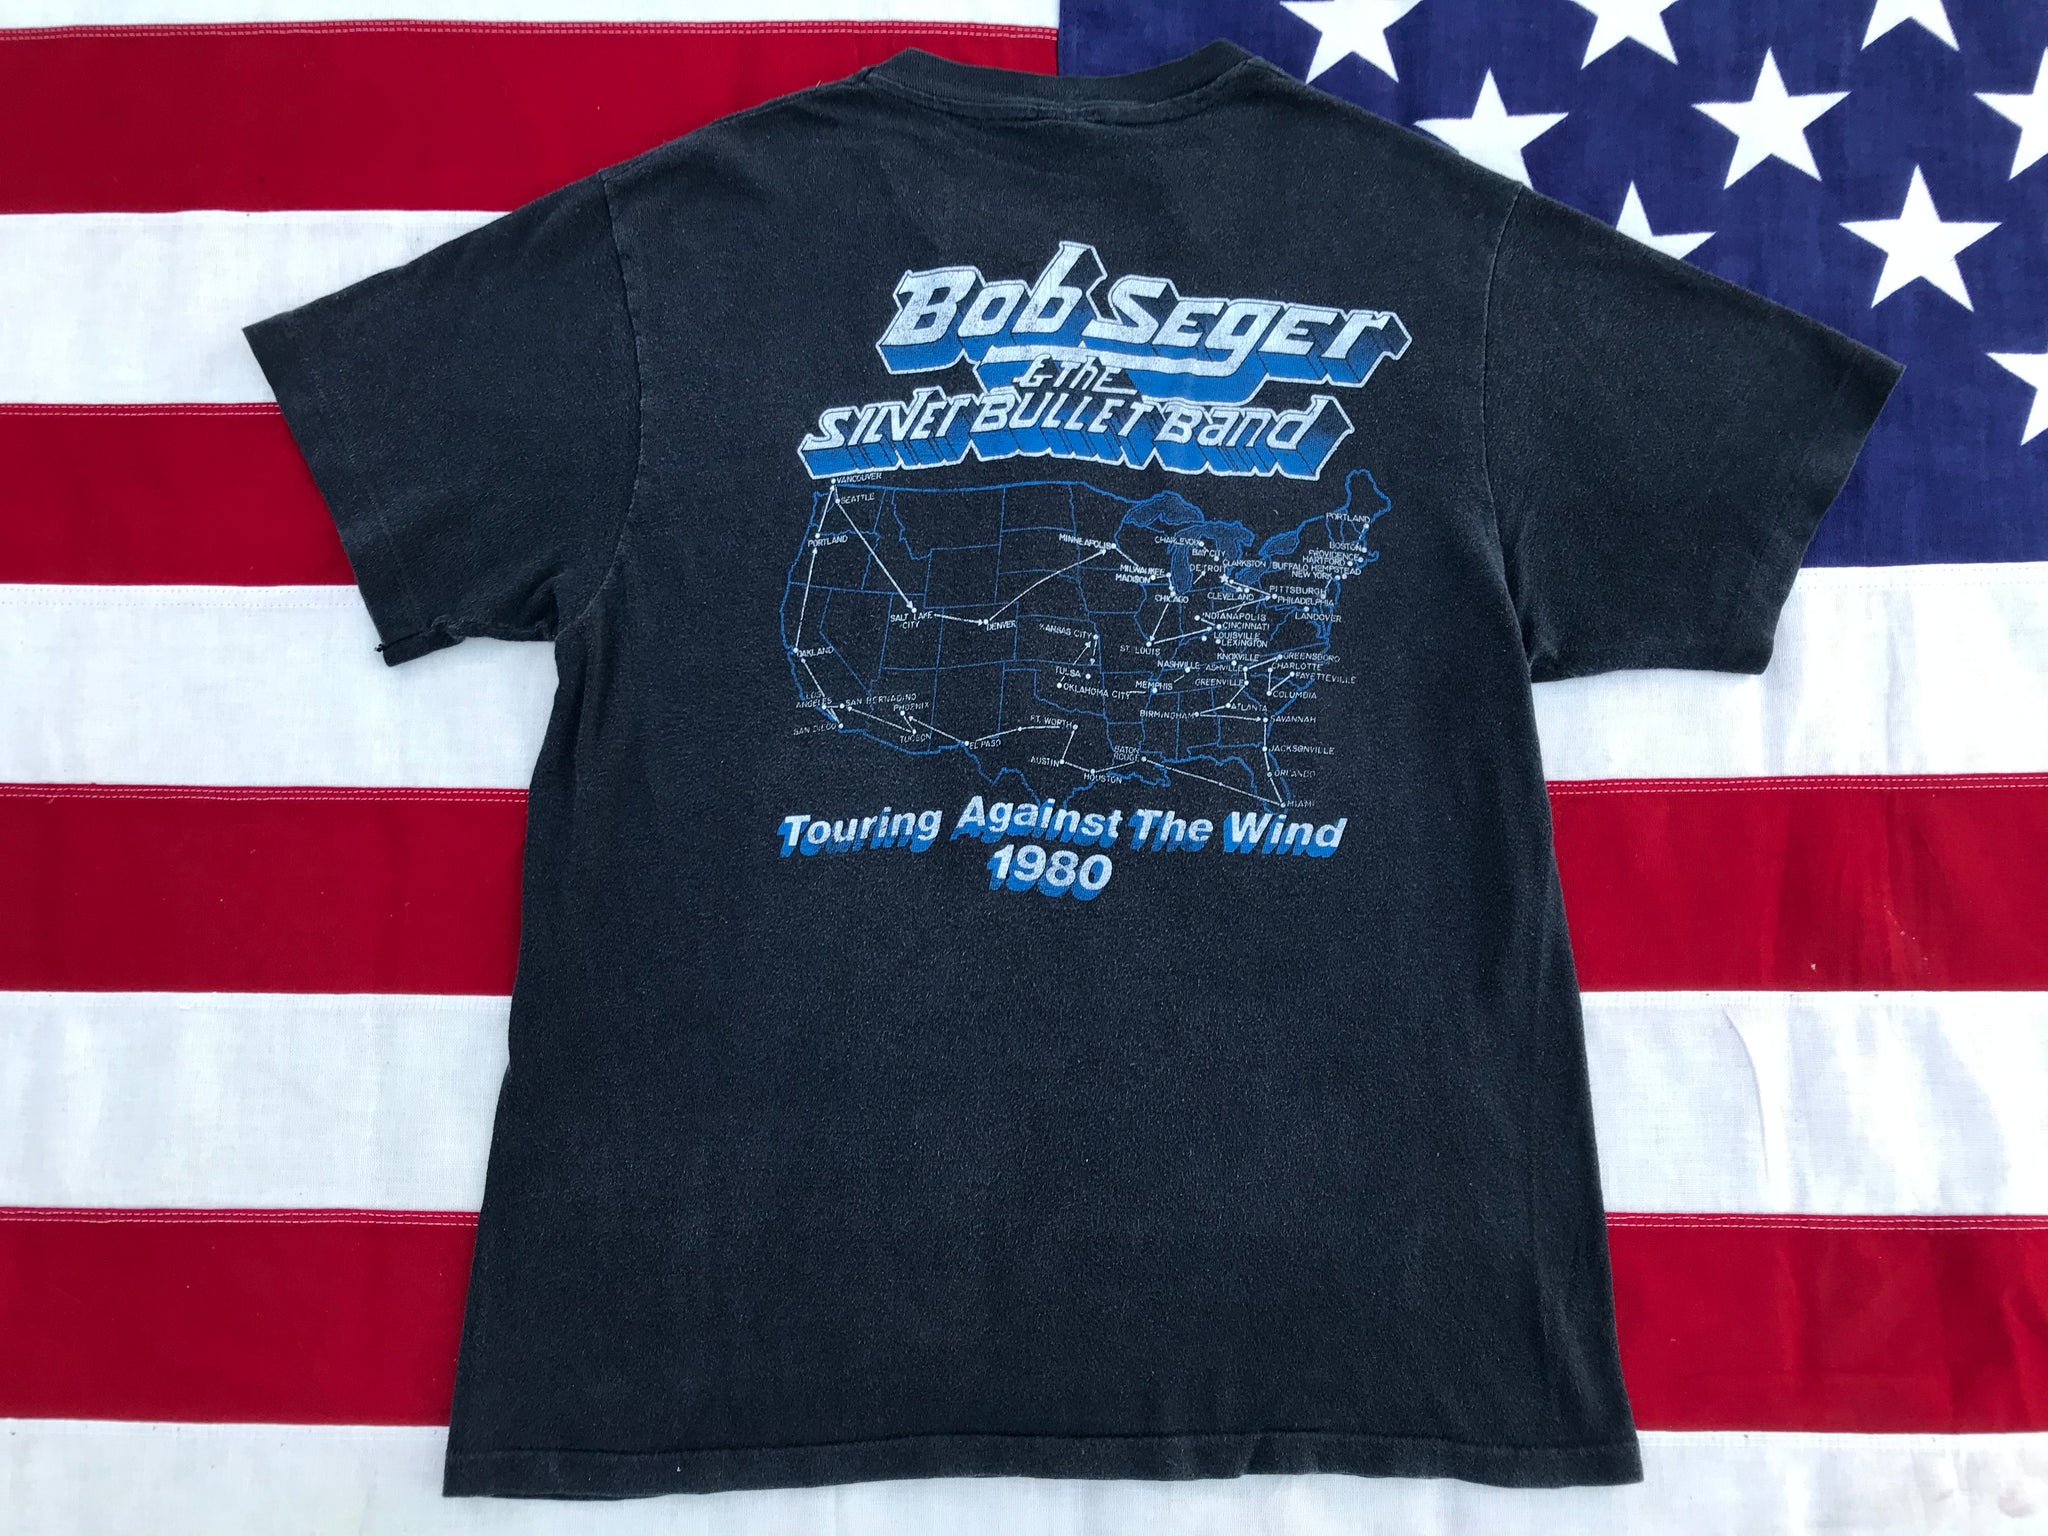 Bob Seger & The Silver Bullet Band “ Touring Against The Wind 1980 “ Original Vintage Rock T-Shirt by Hanes Made in USA